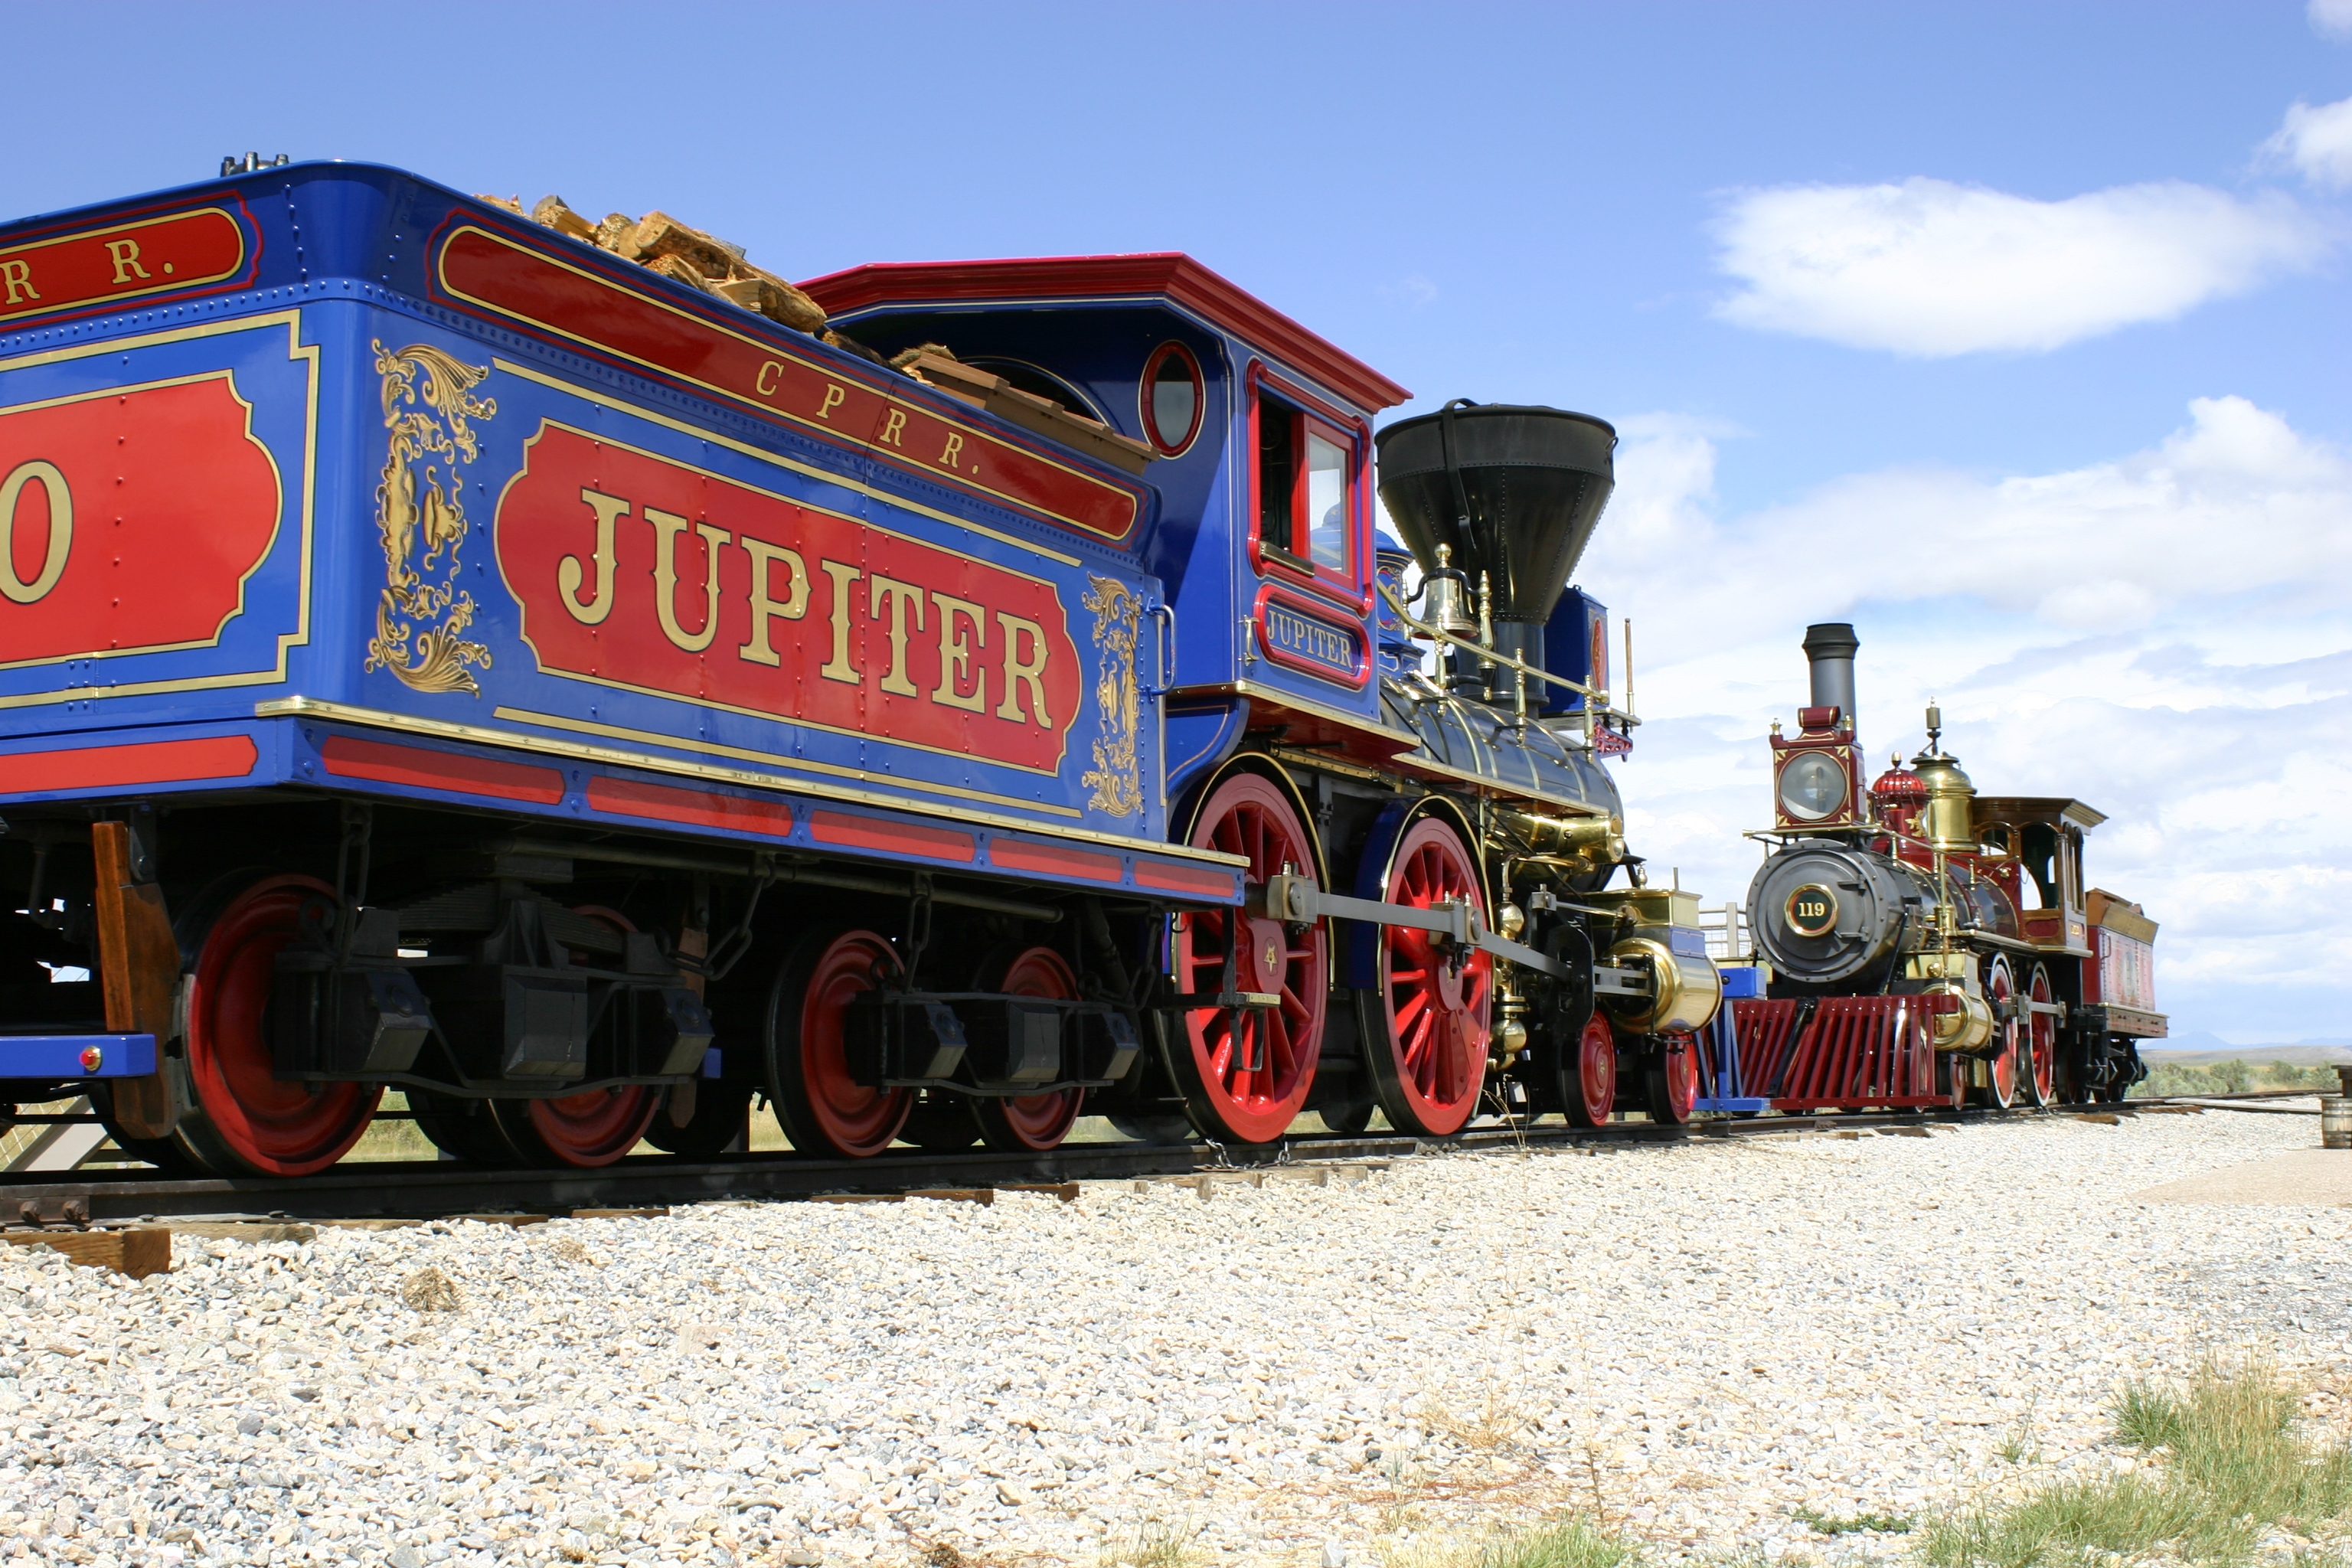 Two replica victorian age steam locomotives face each other on the original railroad grade